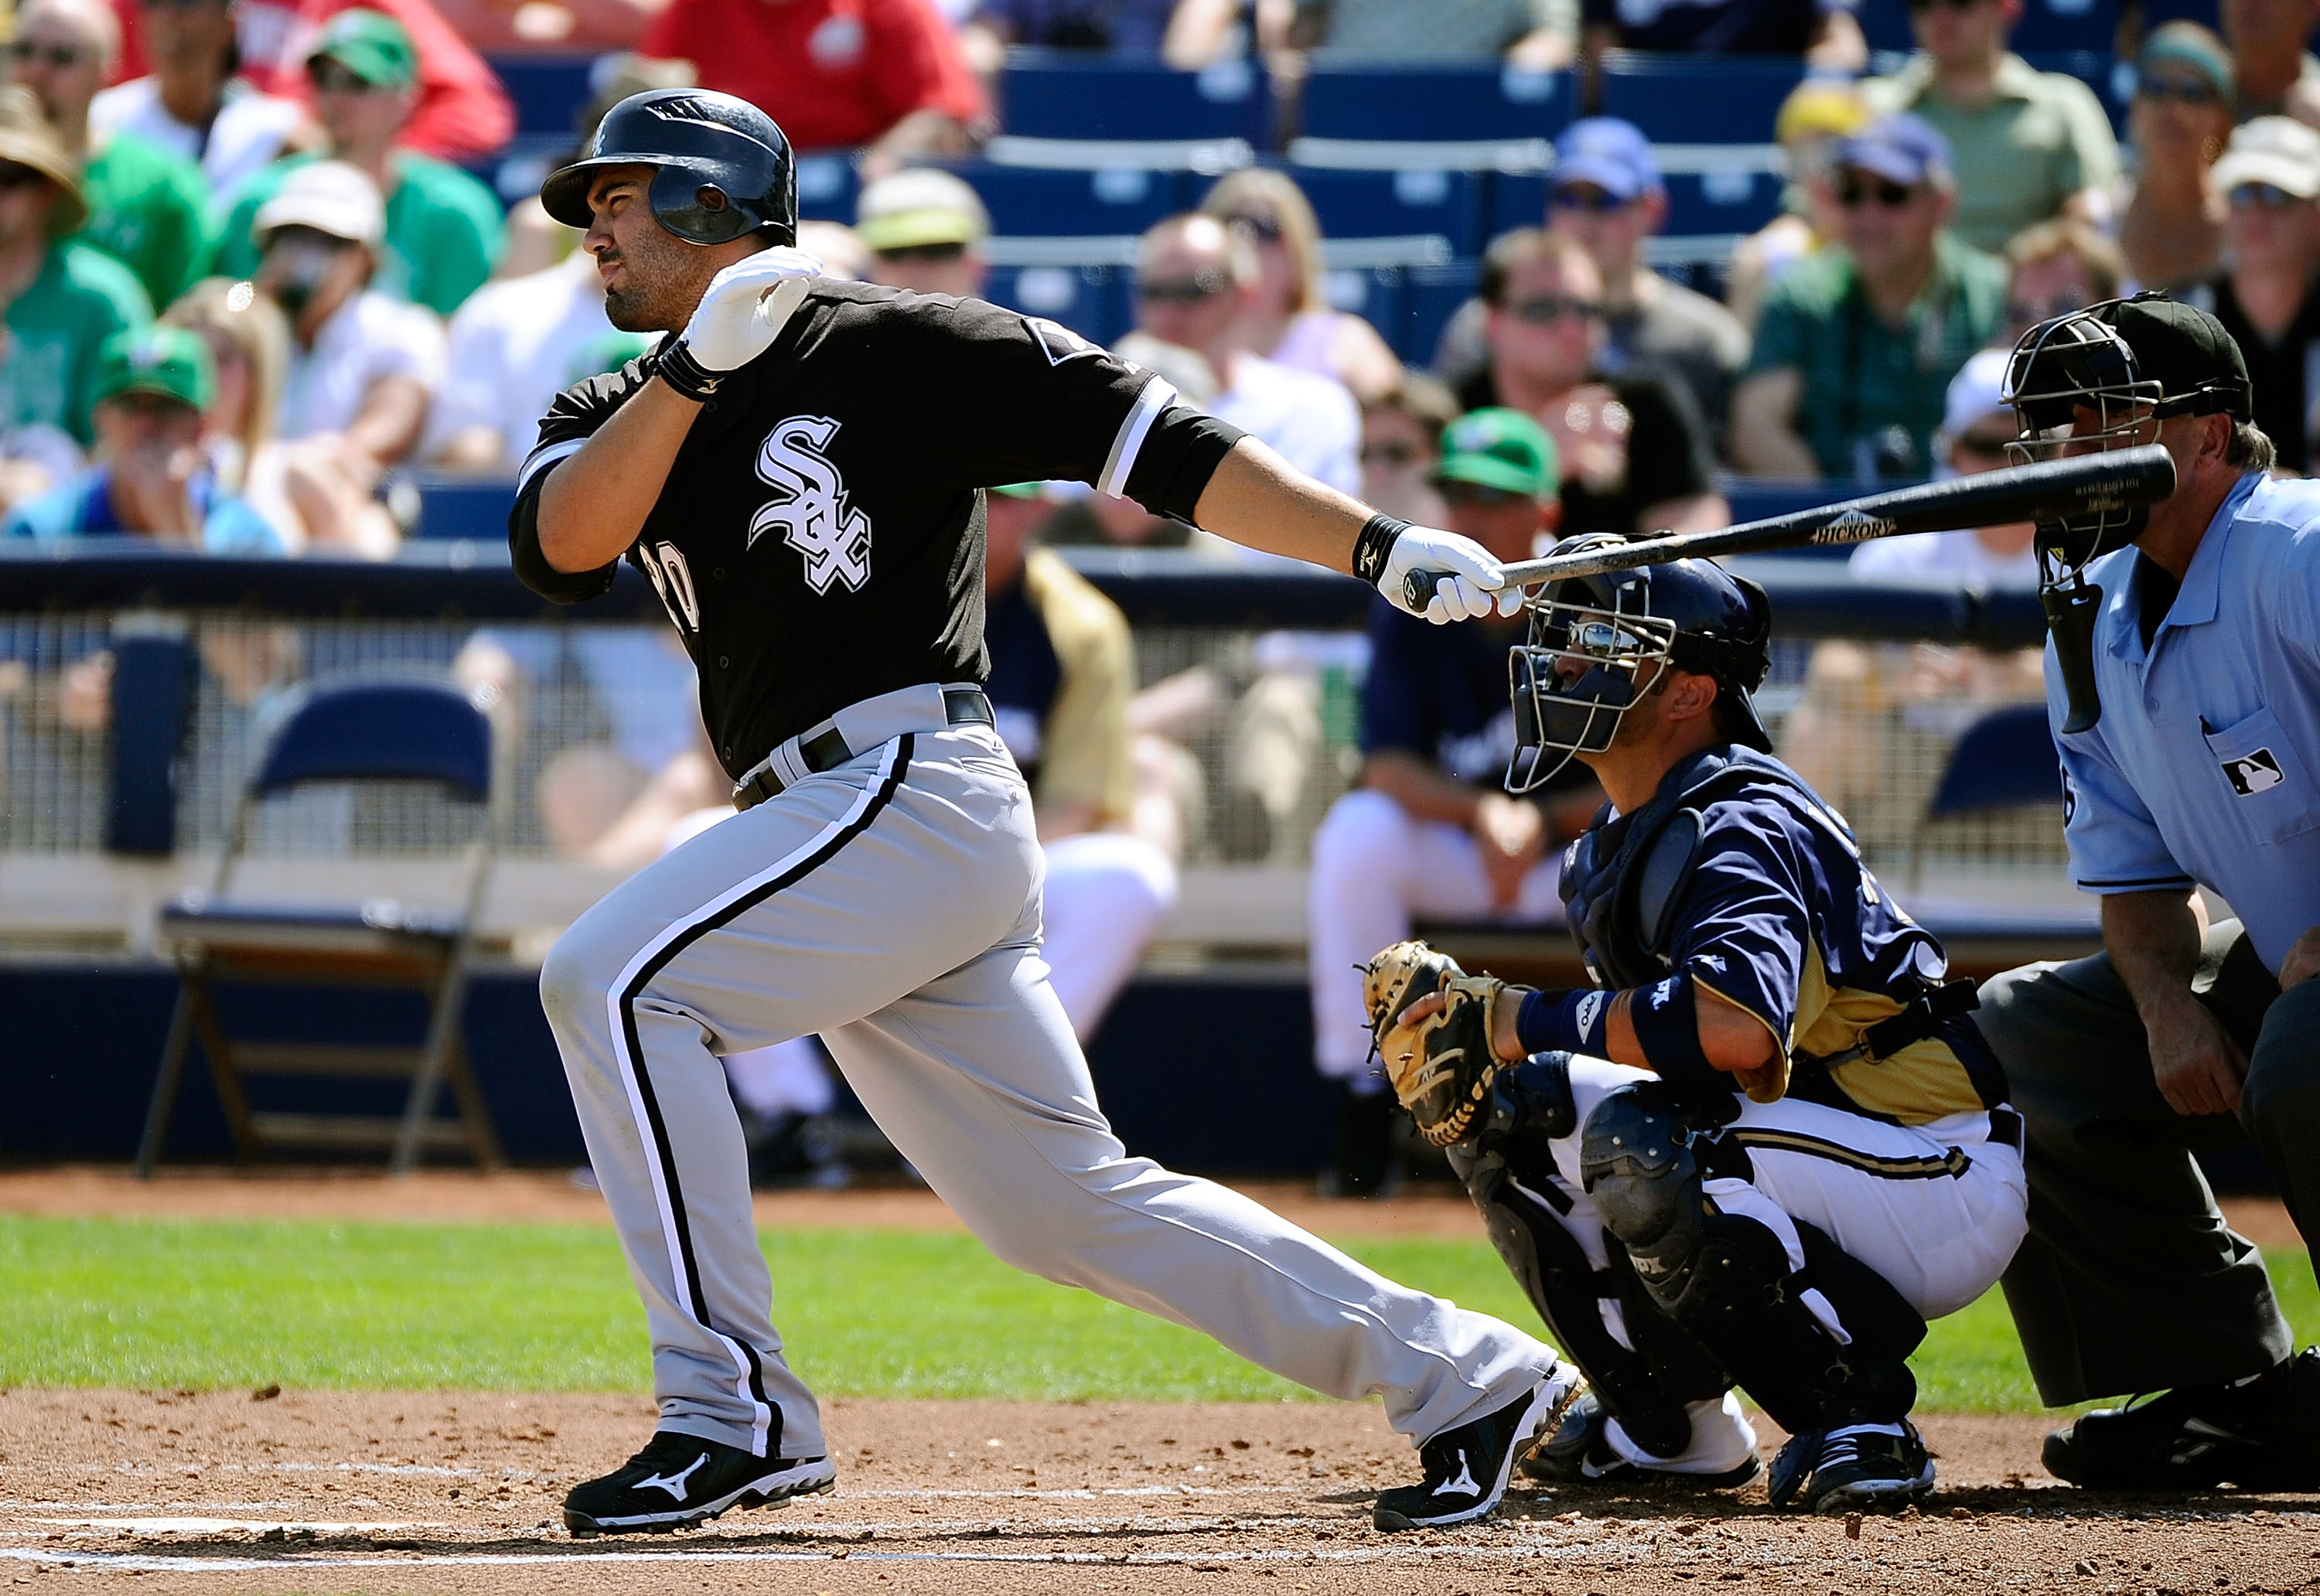 PHOENIX, AZ - MARCH 17:  Carlos Quentin #20 of the Chicago White Sox at bat against the Milwaukee Brewers during the spring training game at Maryvale Baseball Park on March 17, 2011 in Phoenix, Arizona.  (Photo by Kevork Djansezian/Getty Images)